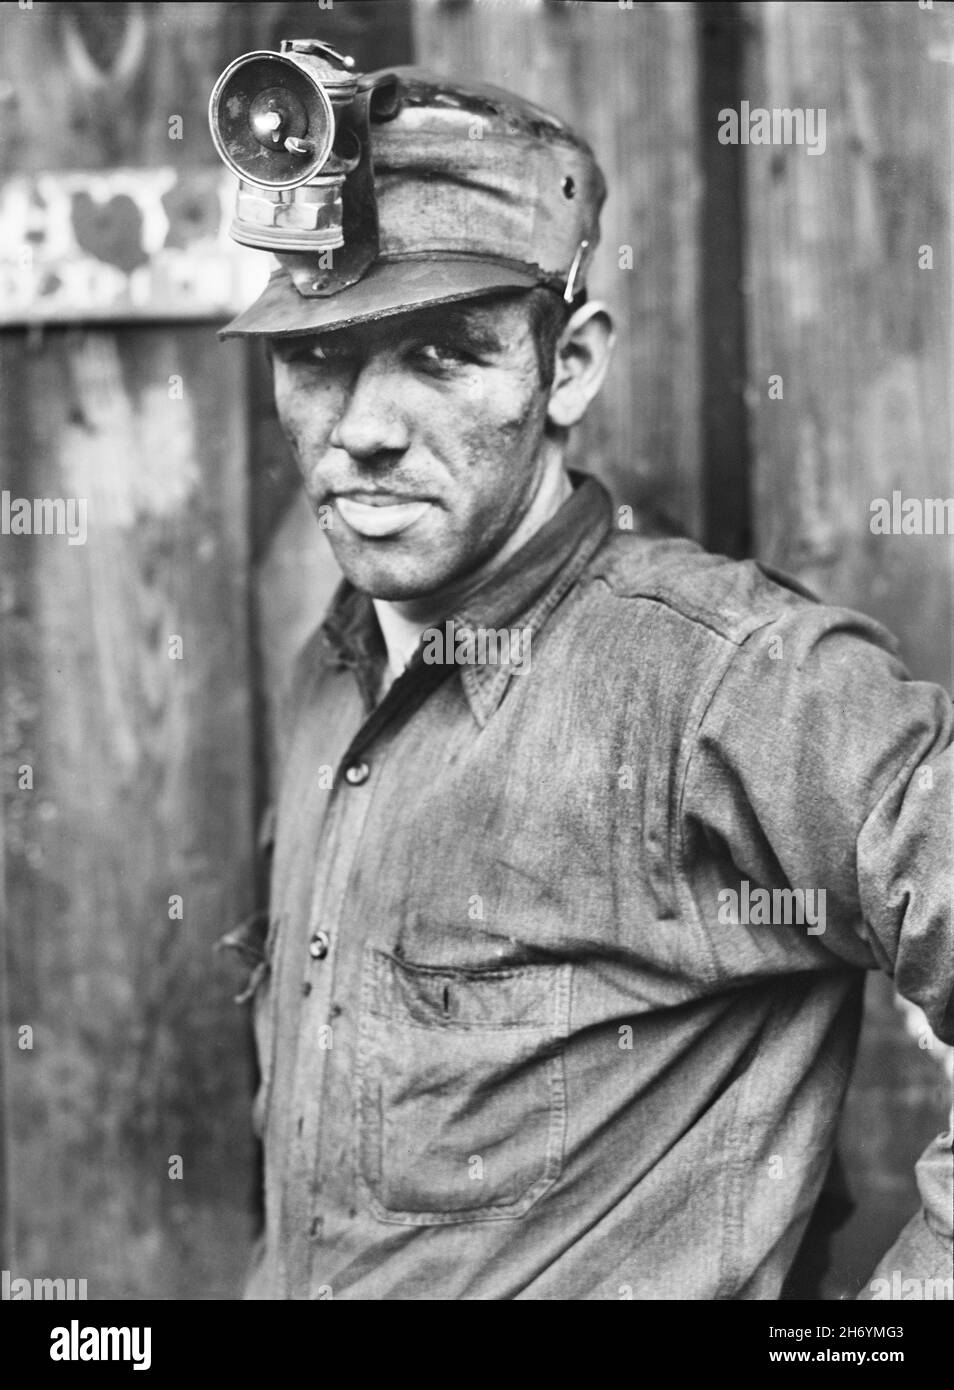 Miner at Dougherty's Mine, near Falls Creek, Pennsylvania, USA, Jack Delano, U.S. Farm Security Administration, U.S. Office of War Information Photograph Collection, August 1940 Stock Photo